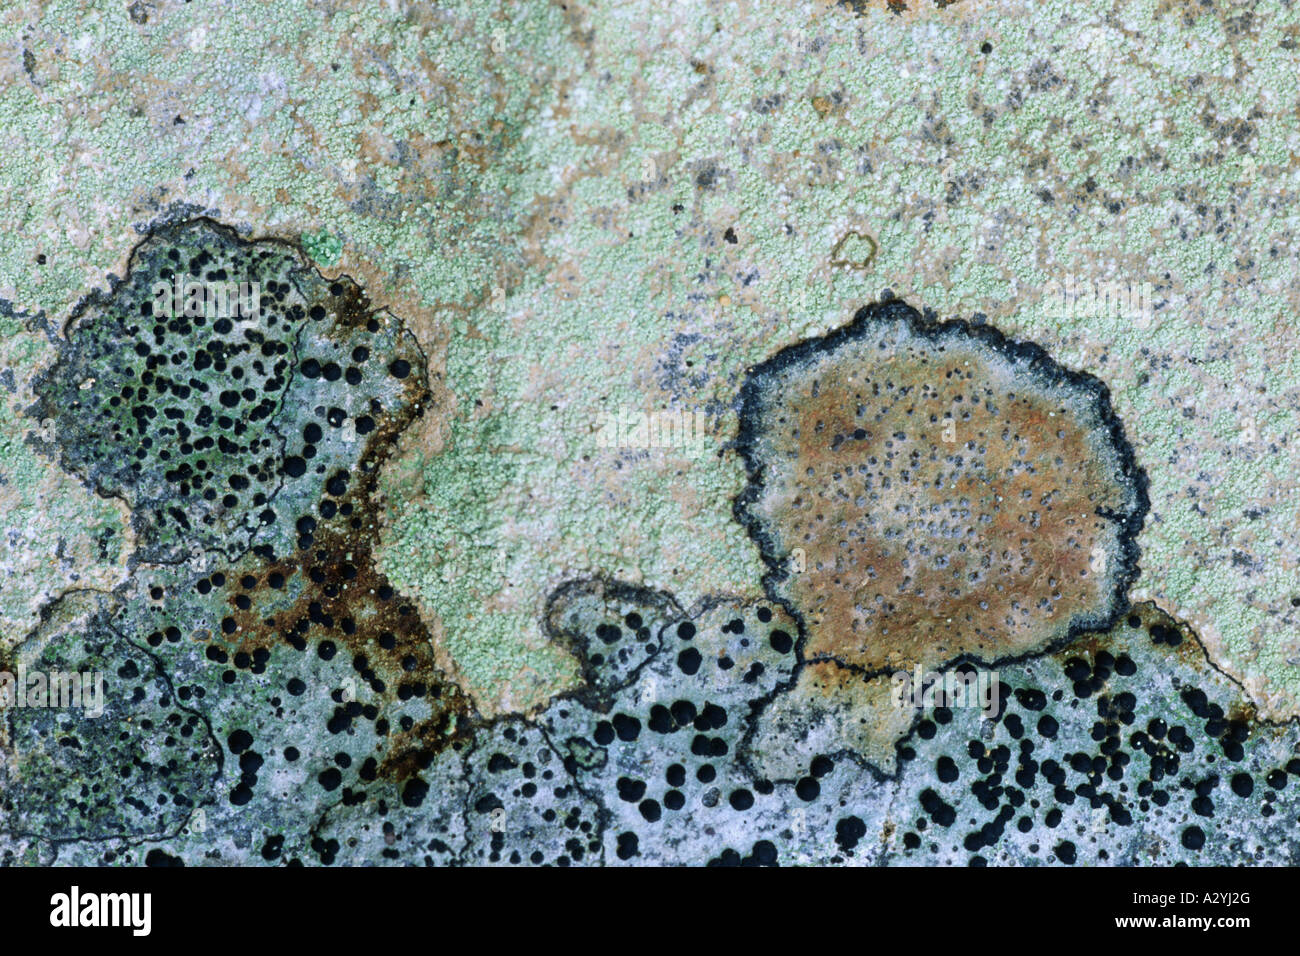 Lichens growing on a flat surface of Silurian shale. Powys, Wales, UK. Stock Photo